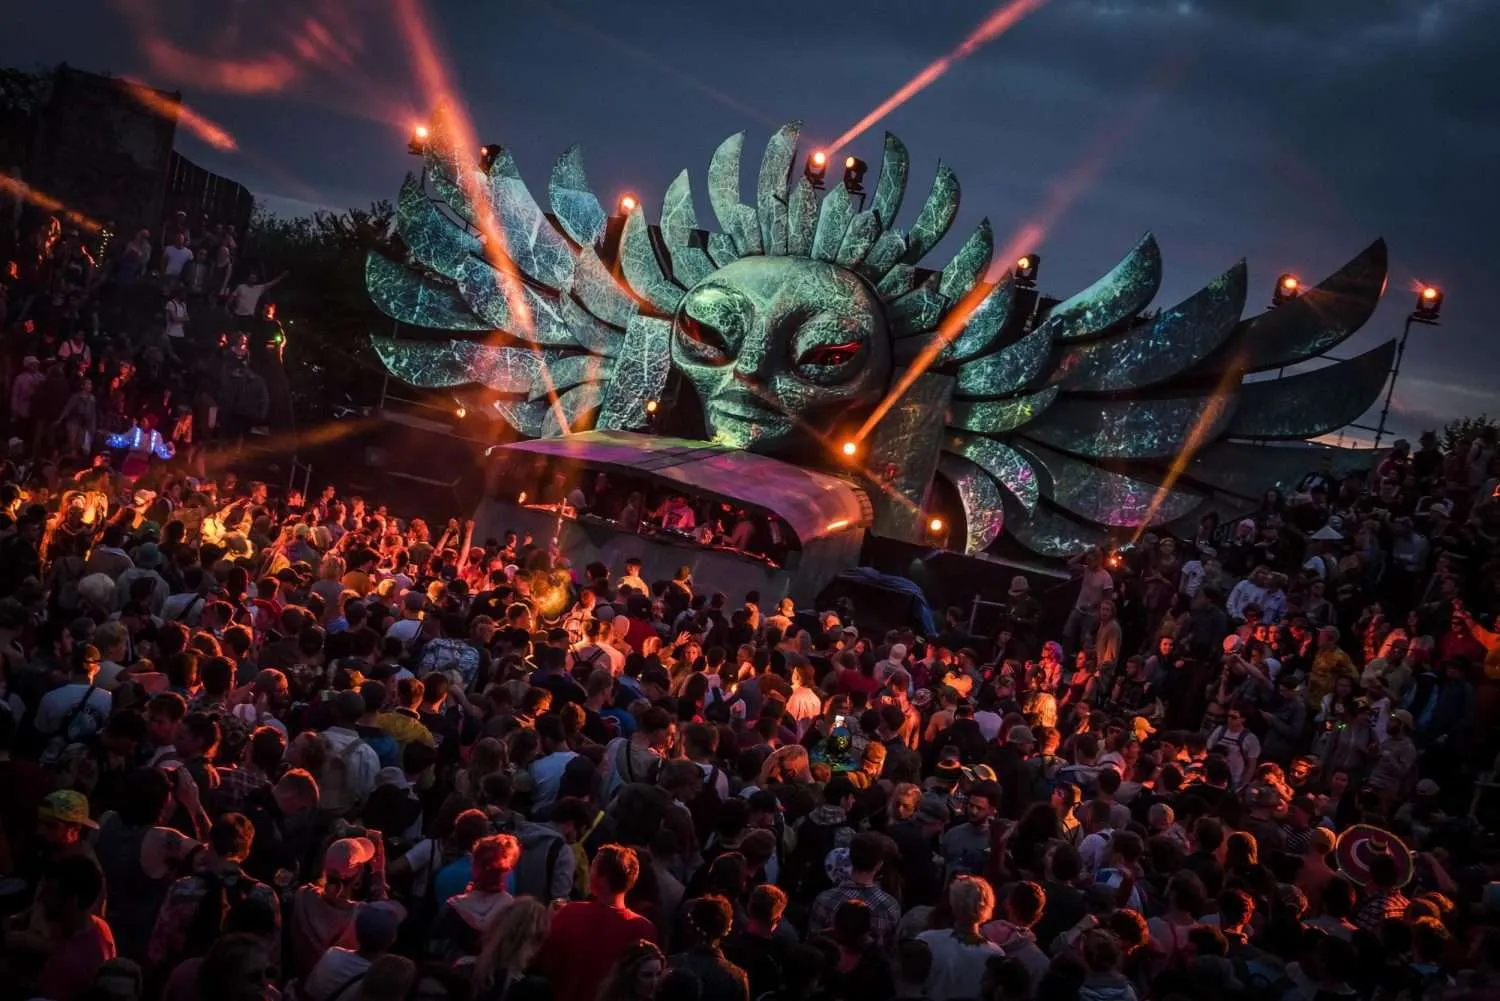 A vibrant outdoor music festival scene at dusk, featuring a large, illuminated stage with an extravagant alien-themed design and state-of-the-art festival audio production, surrounded by an energetic crowd of festival-goers immersed